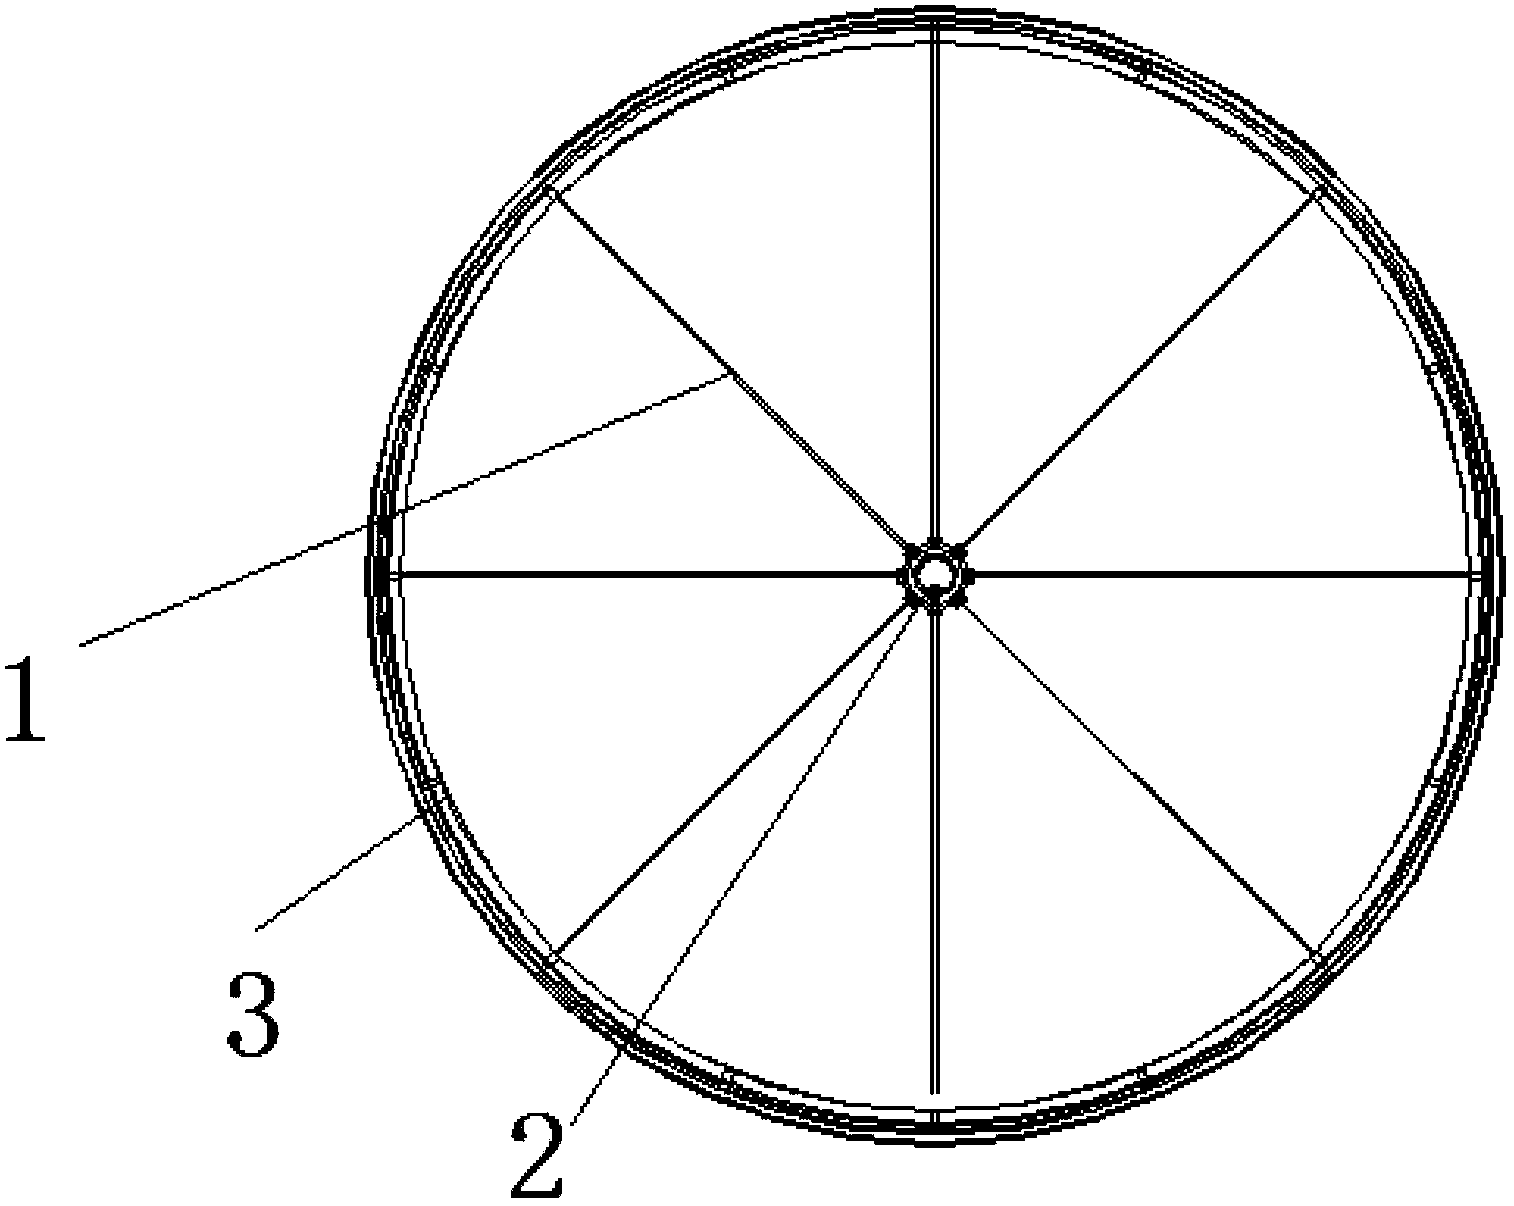 Improved structure for connecting wheel hub and steel wires